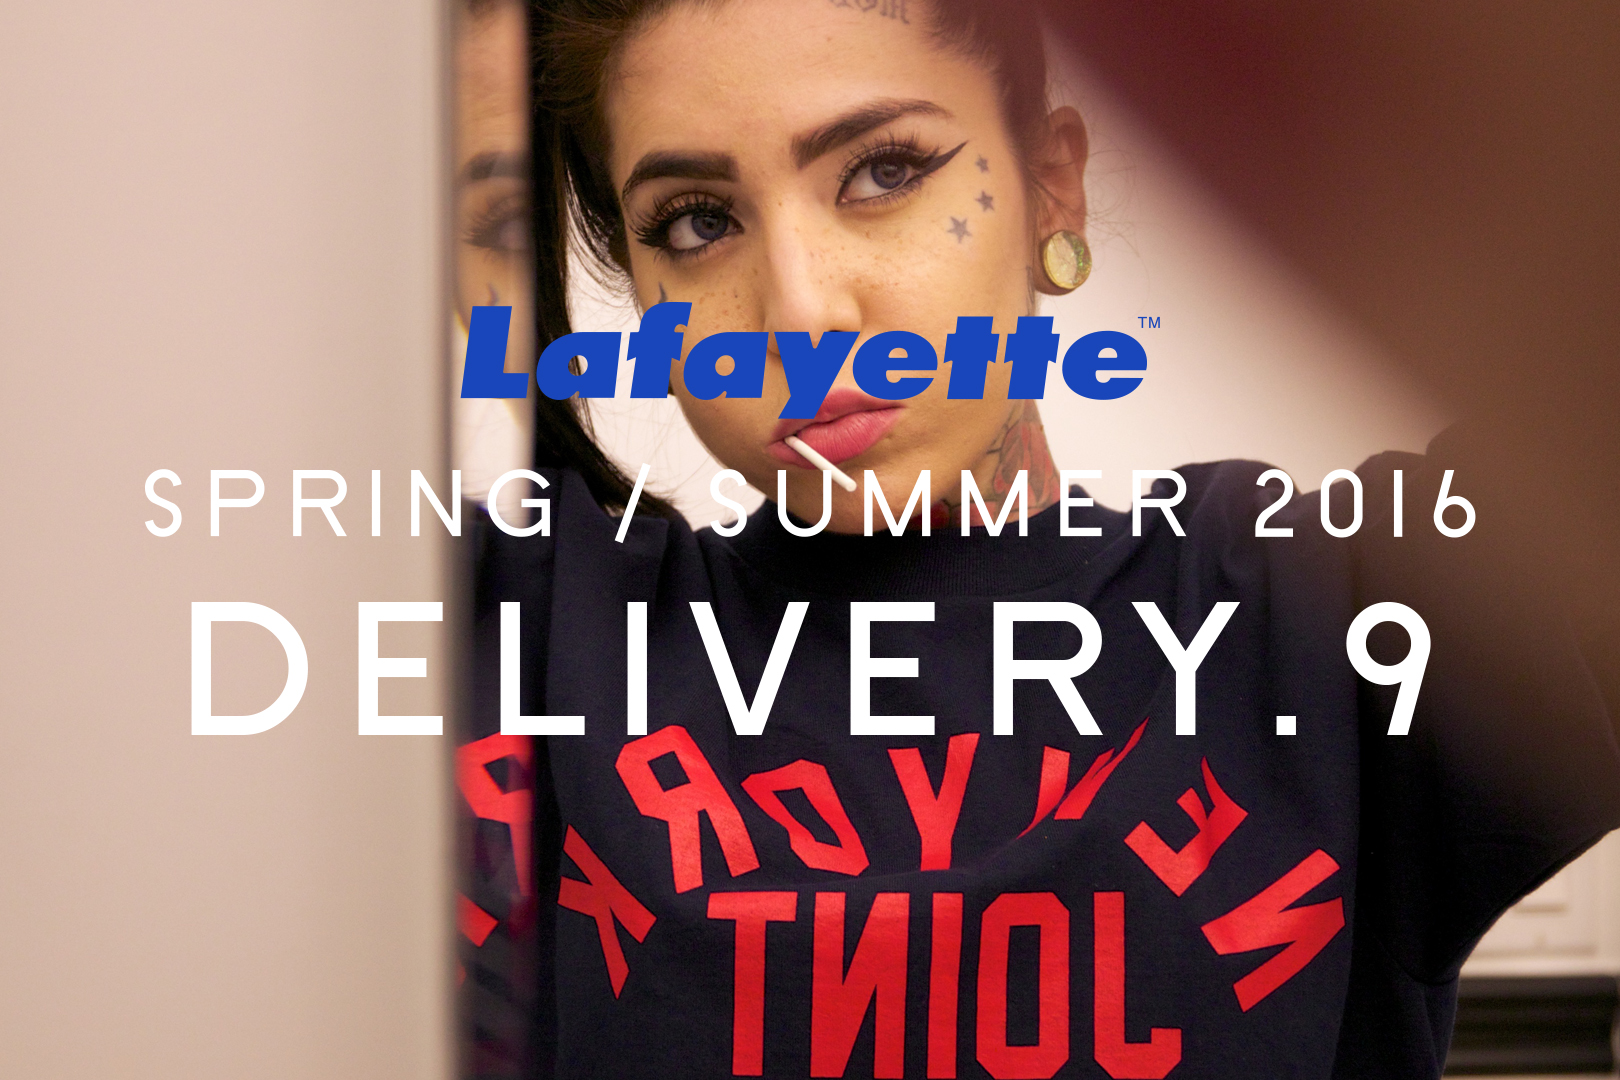 Lafayette Spring/Summer Collection 2016 DELIVERY.9